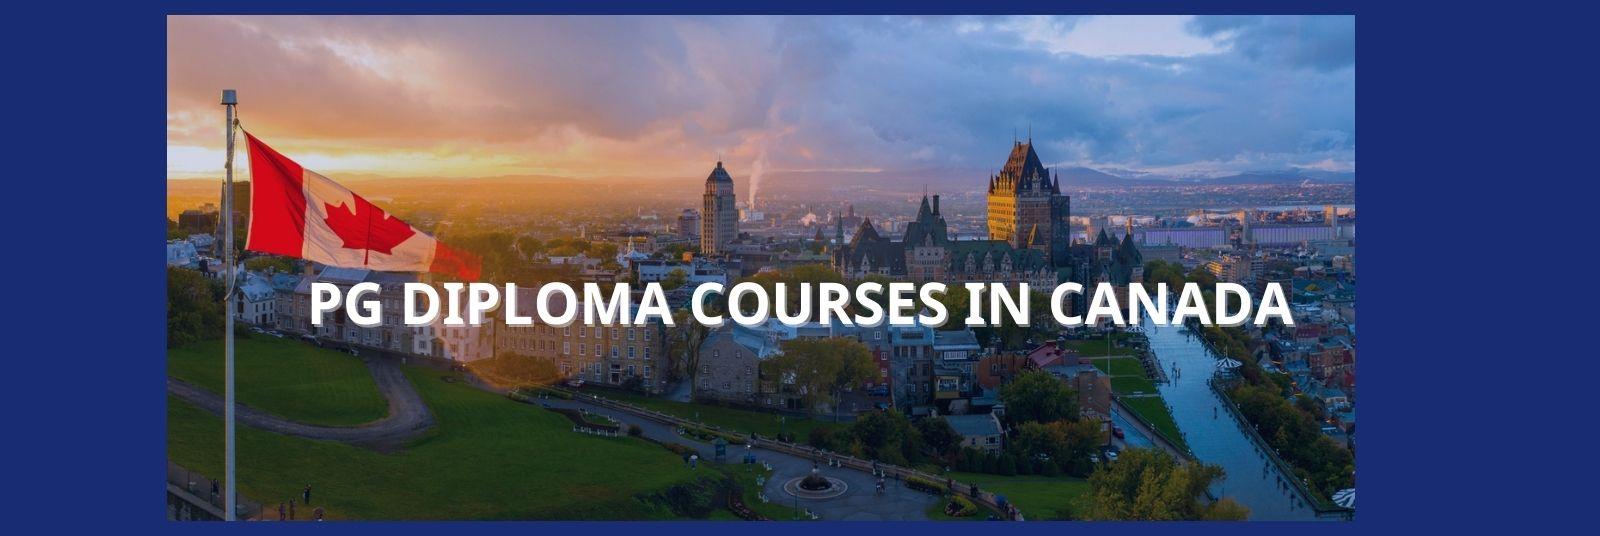 pg diploma courses in canada